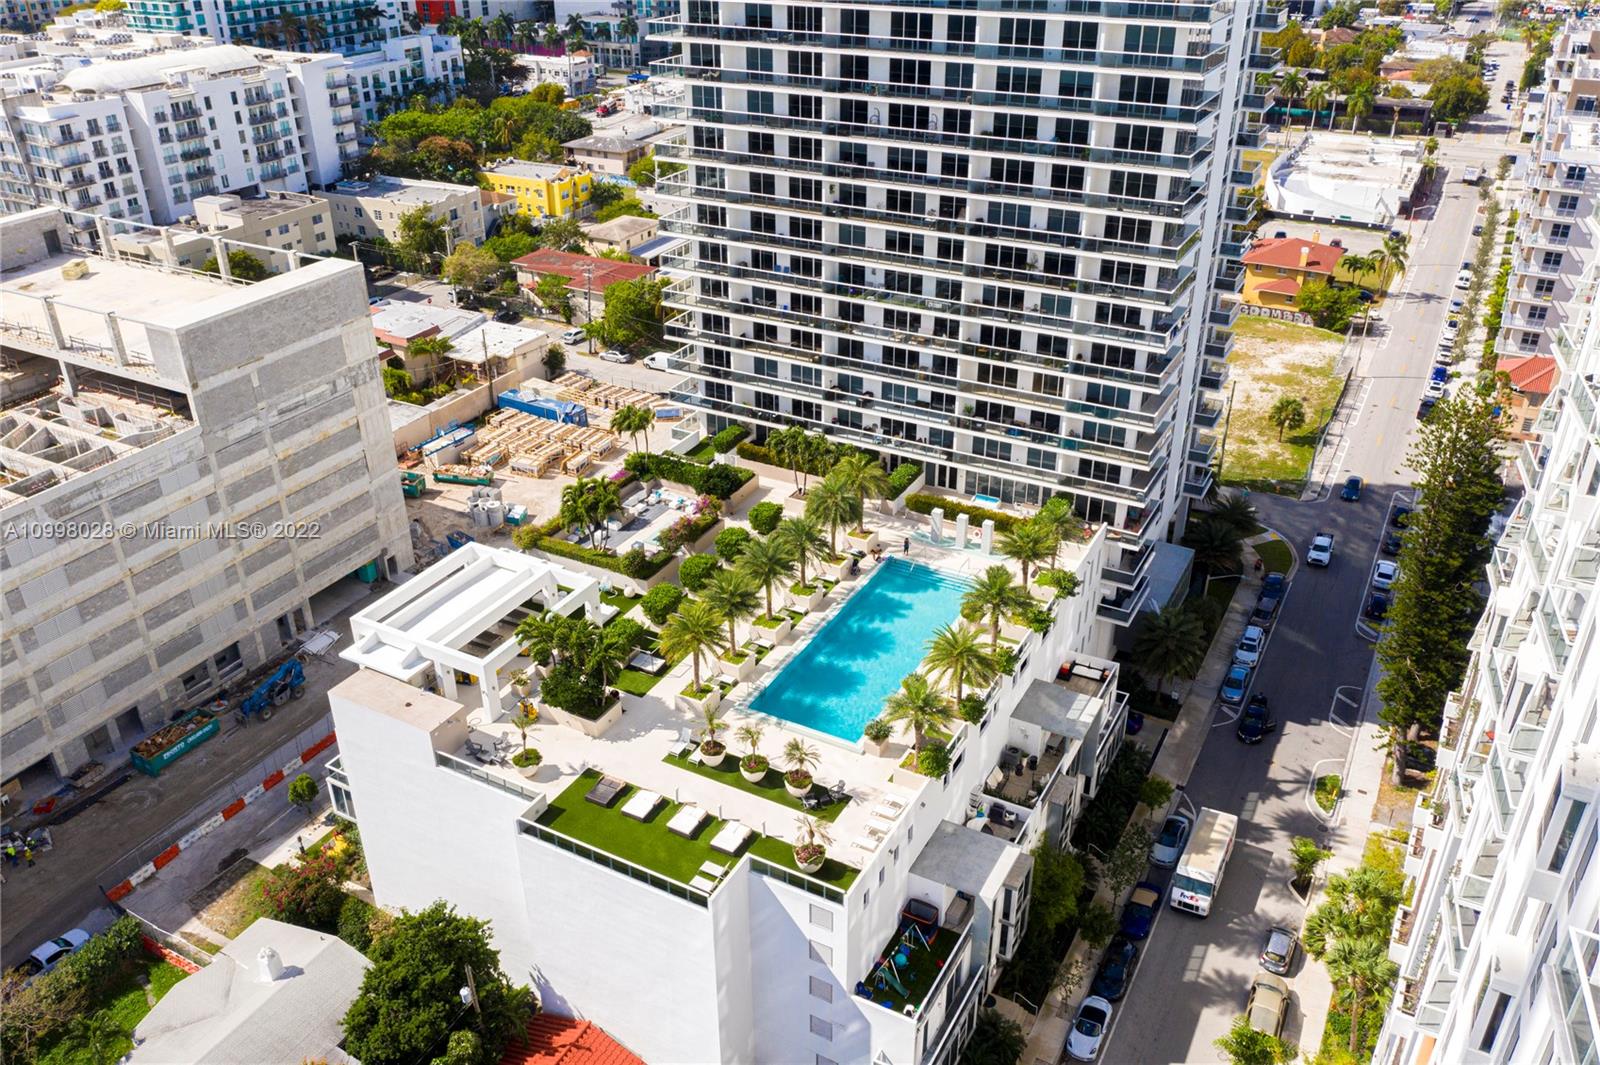 Ariel view of pool and out door amenities